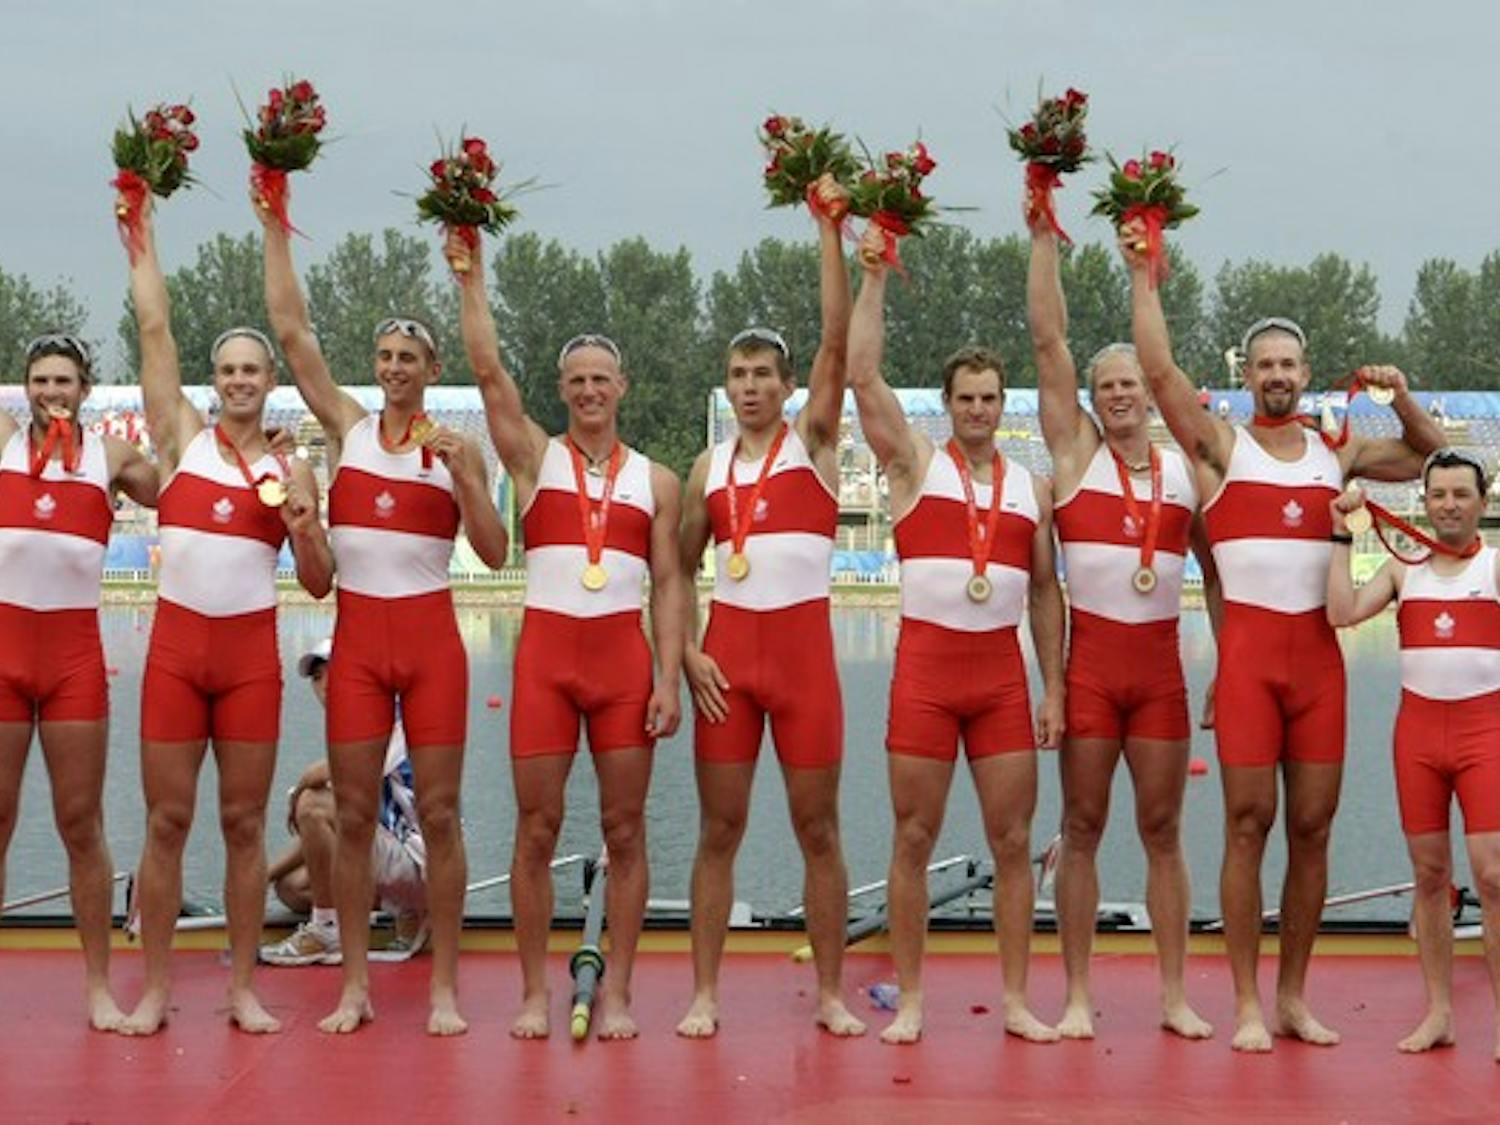 Seiterle, fourth from the right, won Canada's only Olympic gold in rowing events as a member of the men's eight.